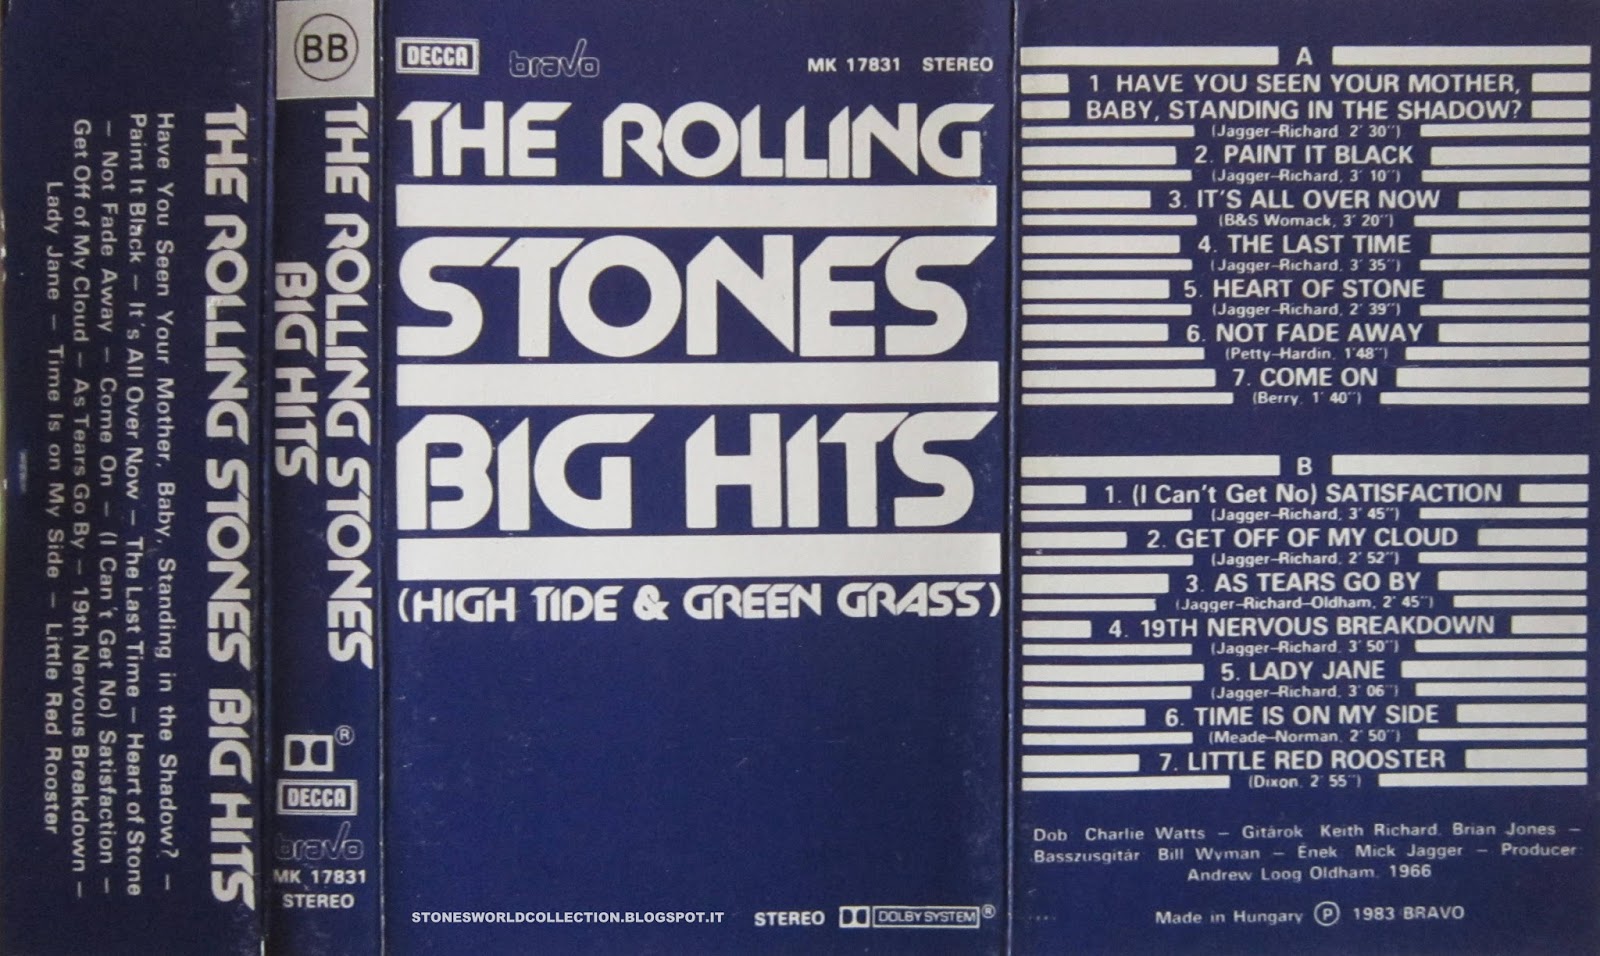 Rolling stones anybody. Rolling Stones big Hits High Tide and Green grass. Big Hits the Rolling Stones. Кассета Rolling Stones 1971. The Rolling Stones – big Hits (High Tide and Green grass) Vinyl.